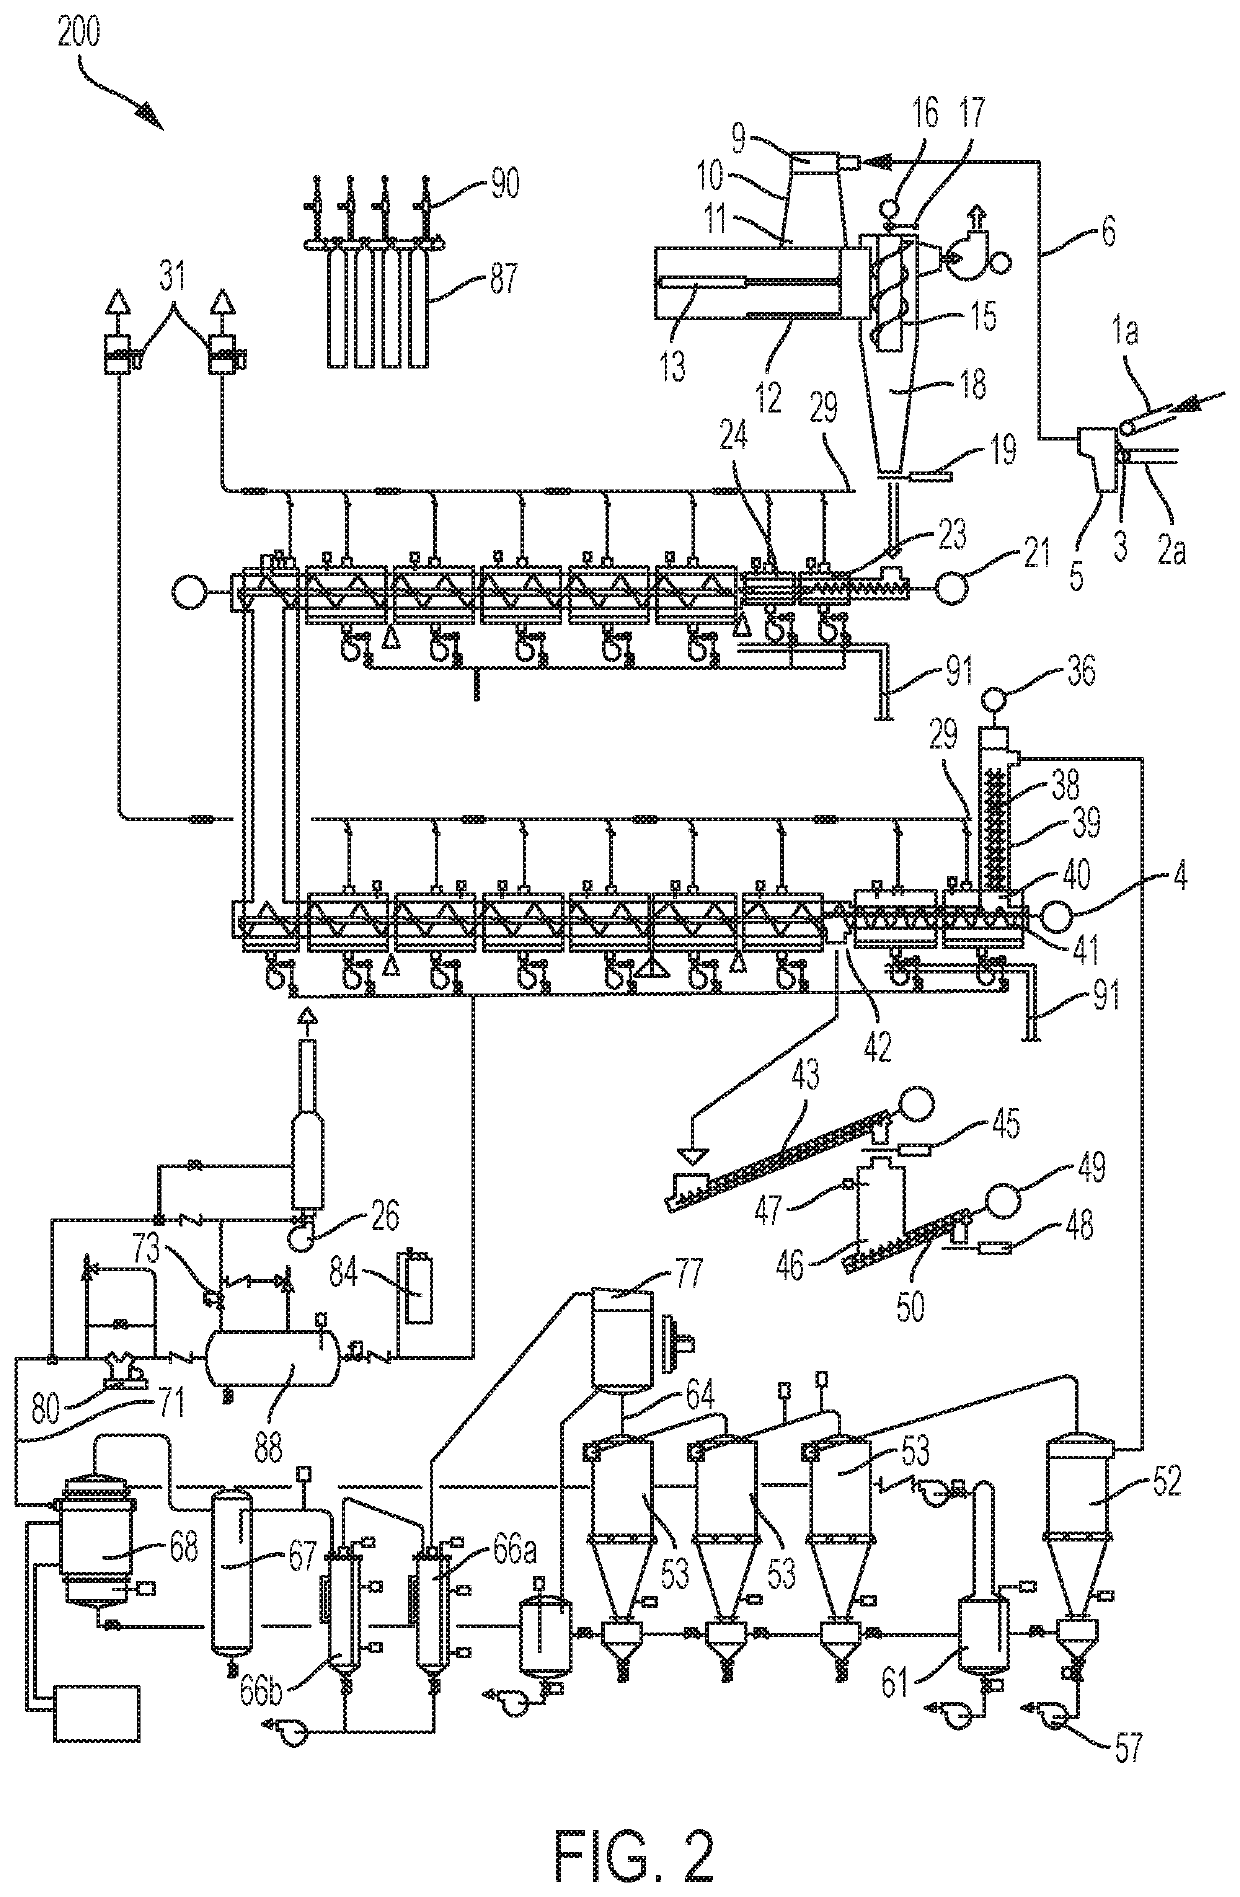 System and process for converting waste plastic into fuel